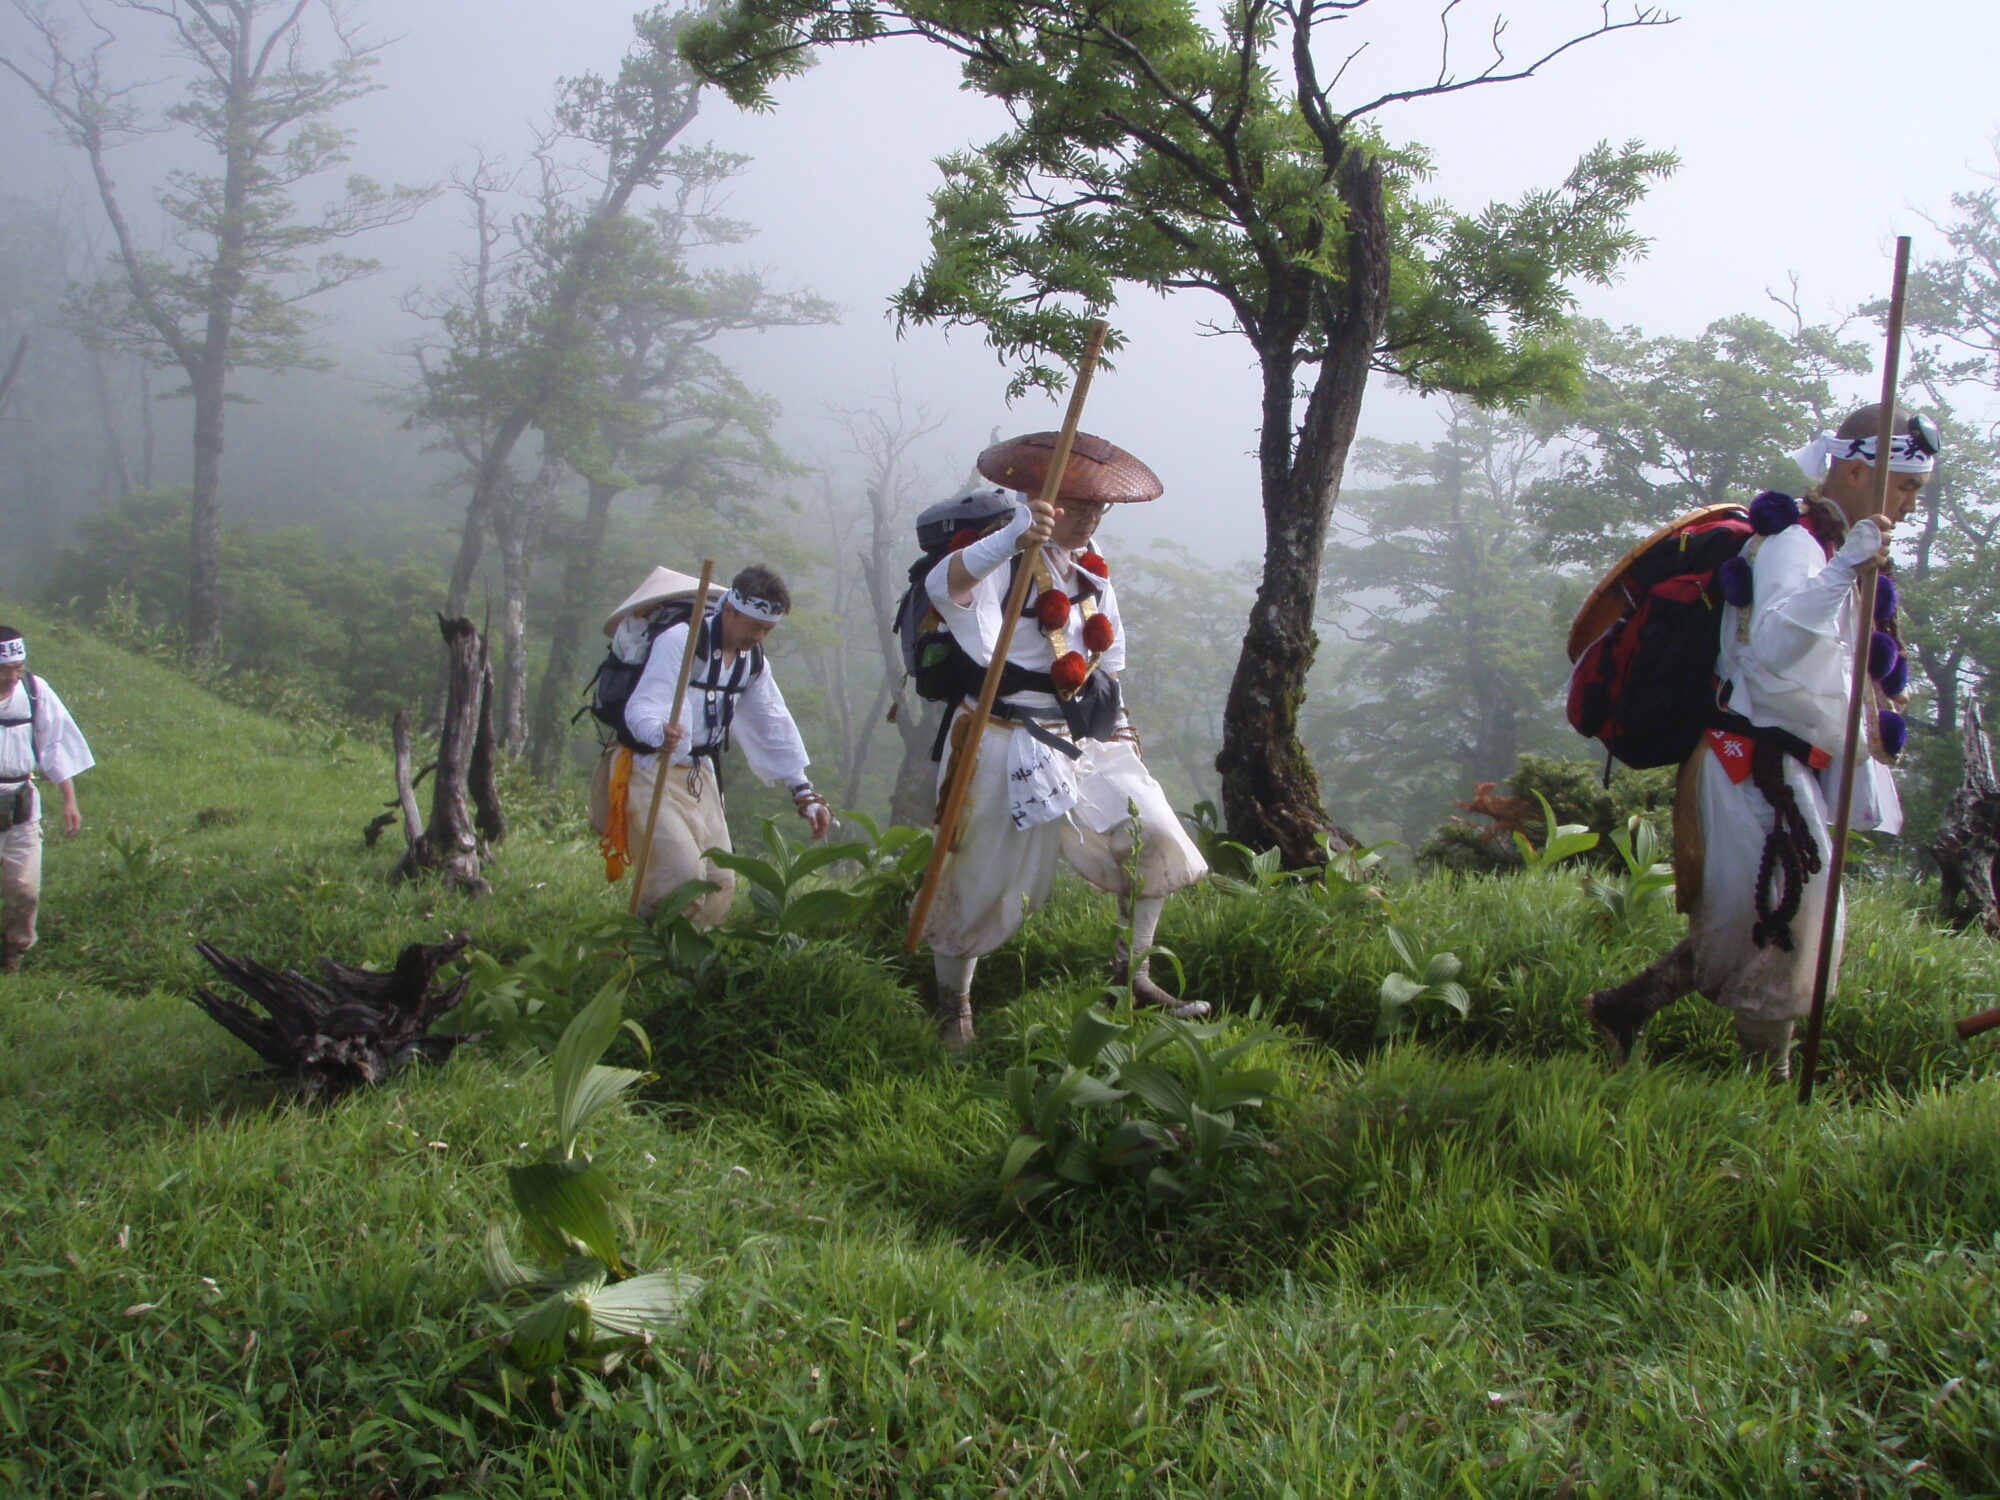 Mountain climbing used to be a religious activity for the Japanese.